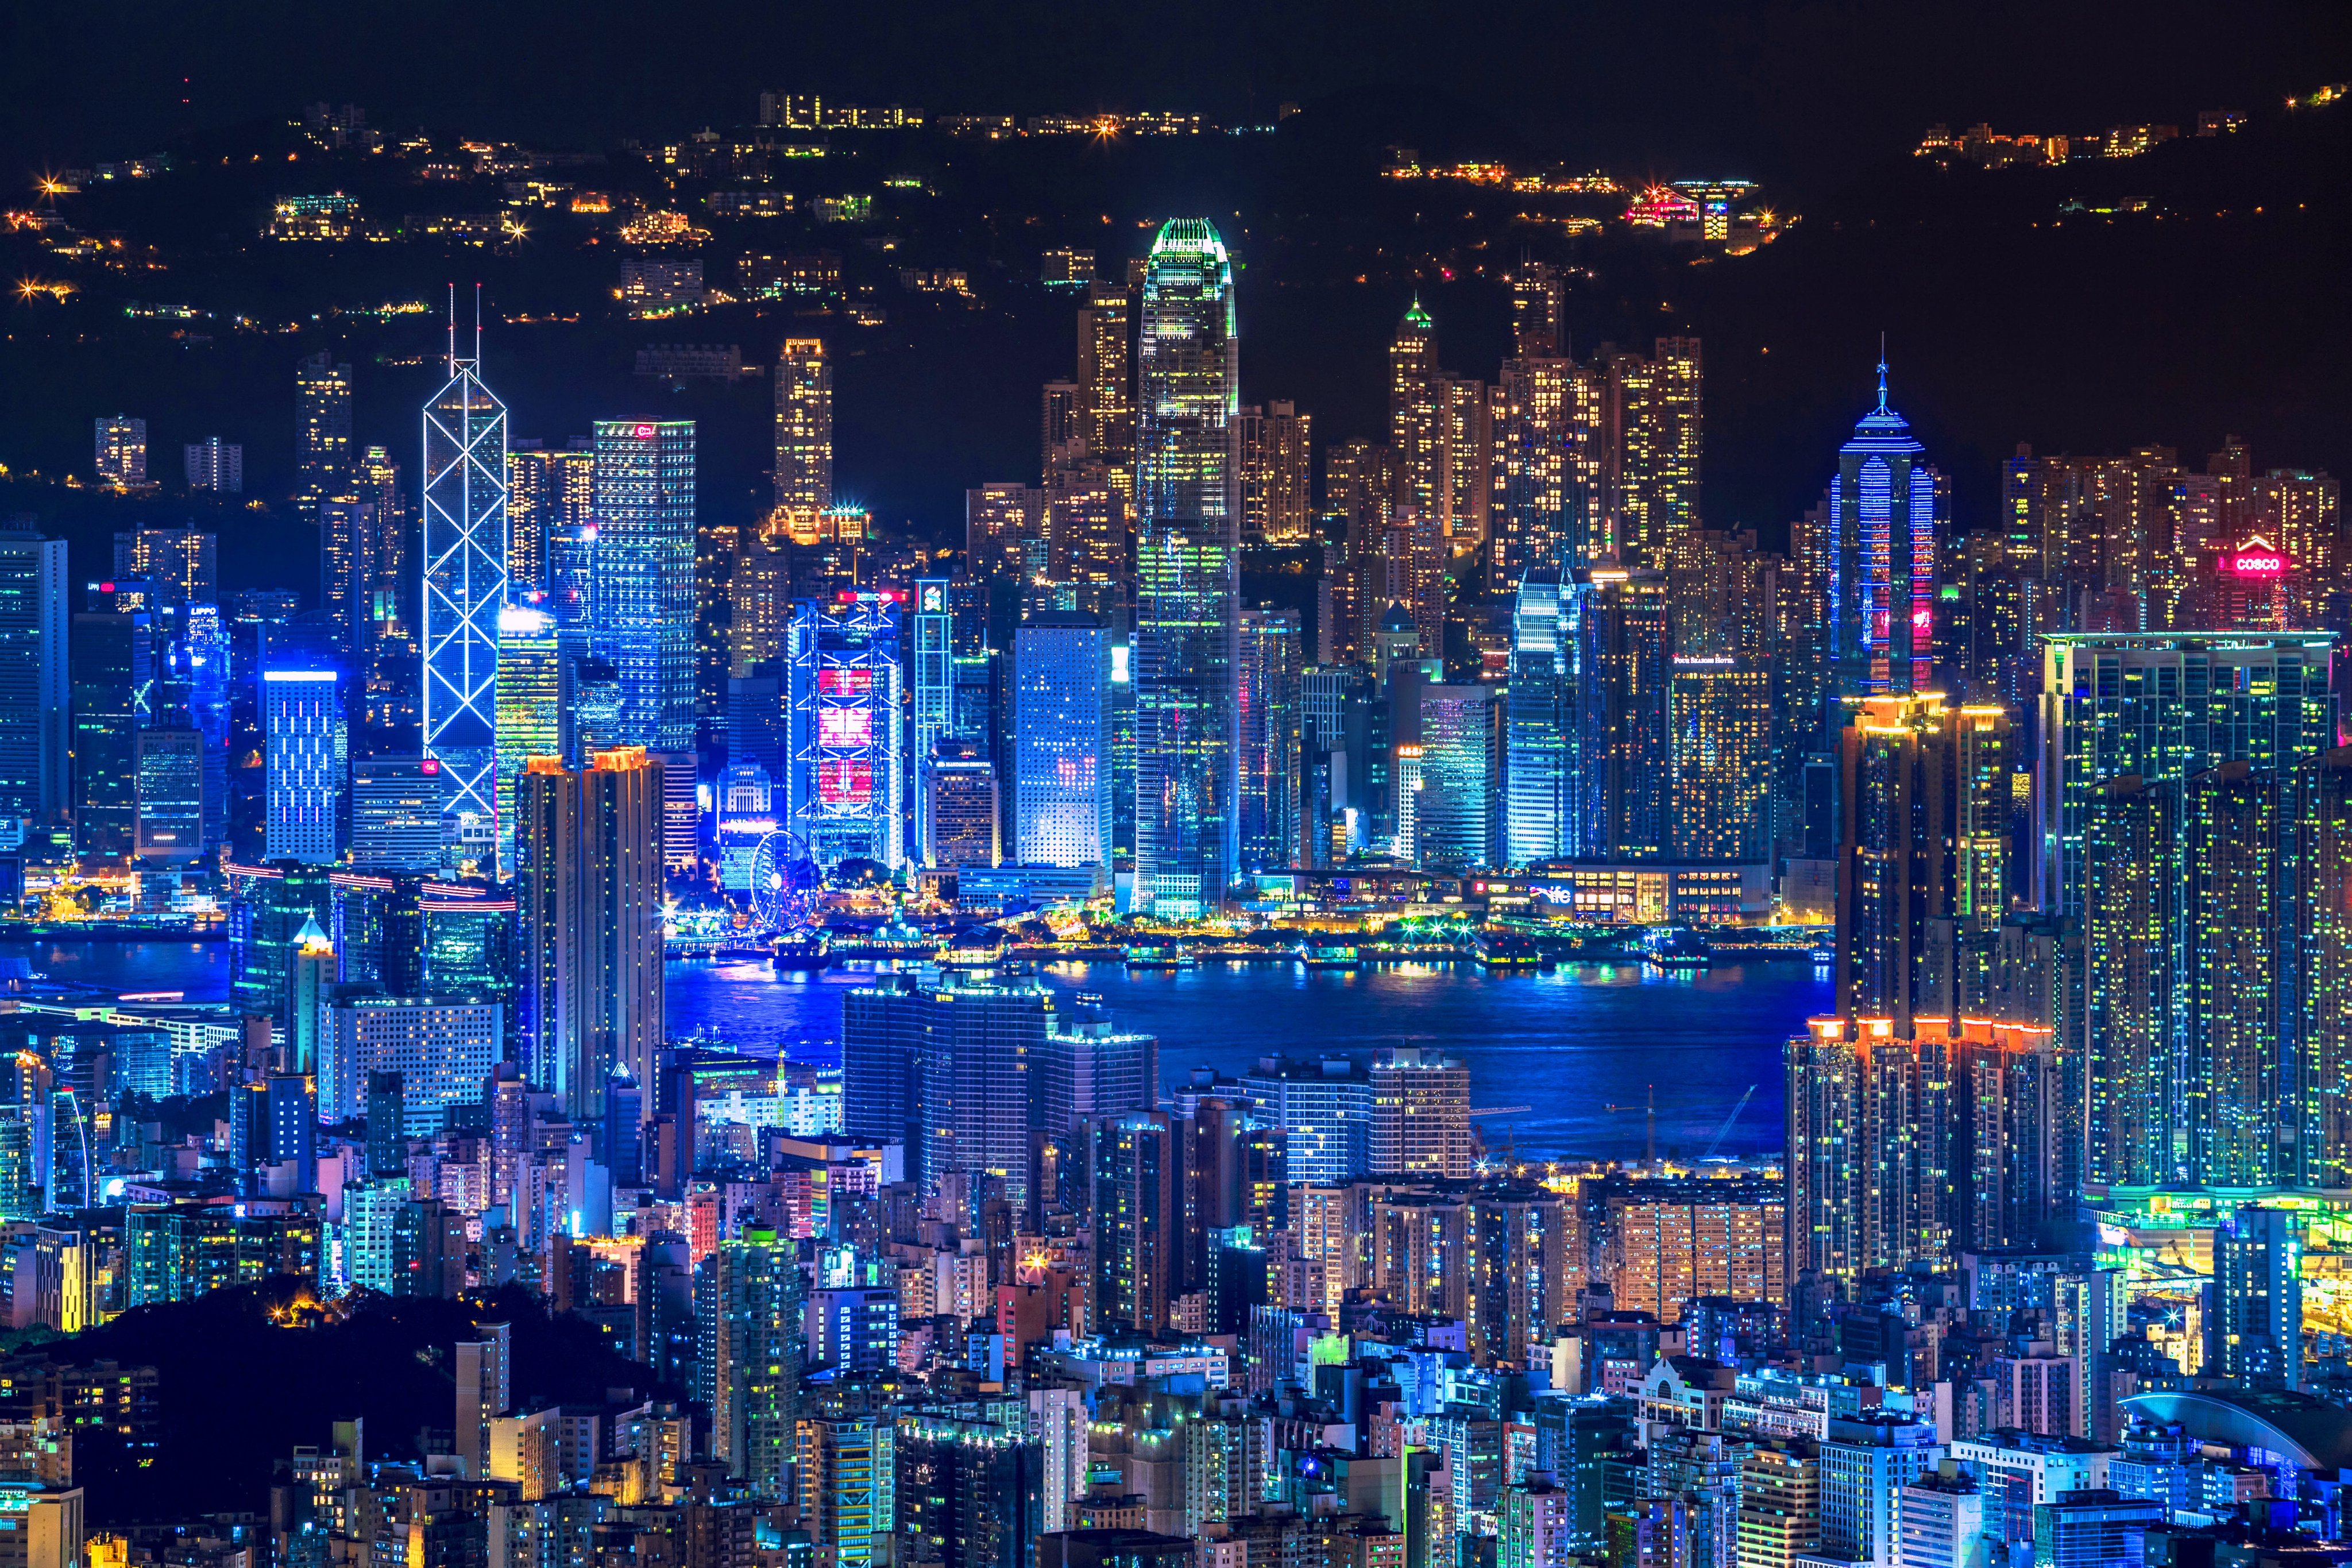 The Hong Kong skyline at night. London, New York and Shanghai, while impressive, can’t compete with Hong Kong’s stunning array of buildings and lights, and it’s something the city must cherish and use to draw tourists. Photo: Getty Images